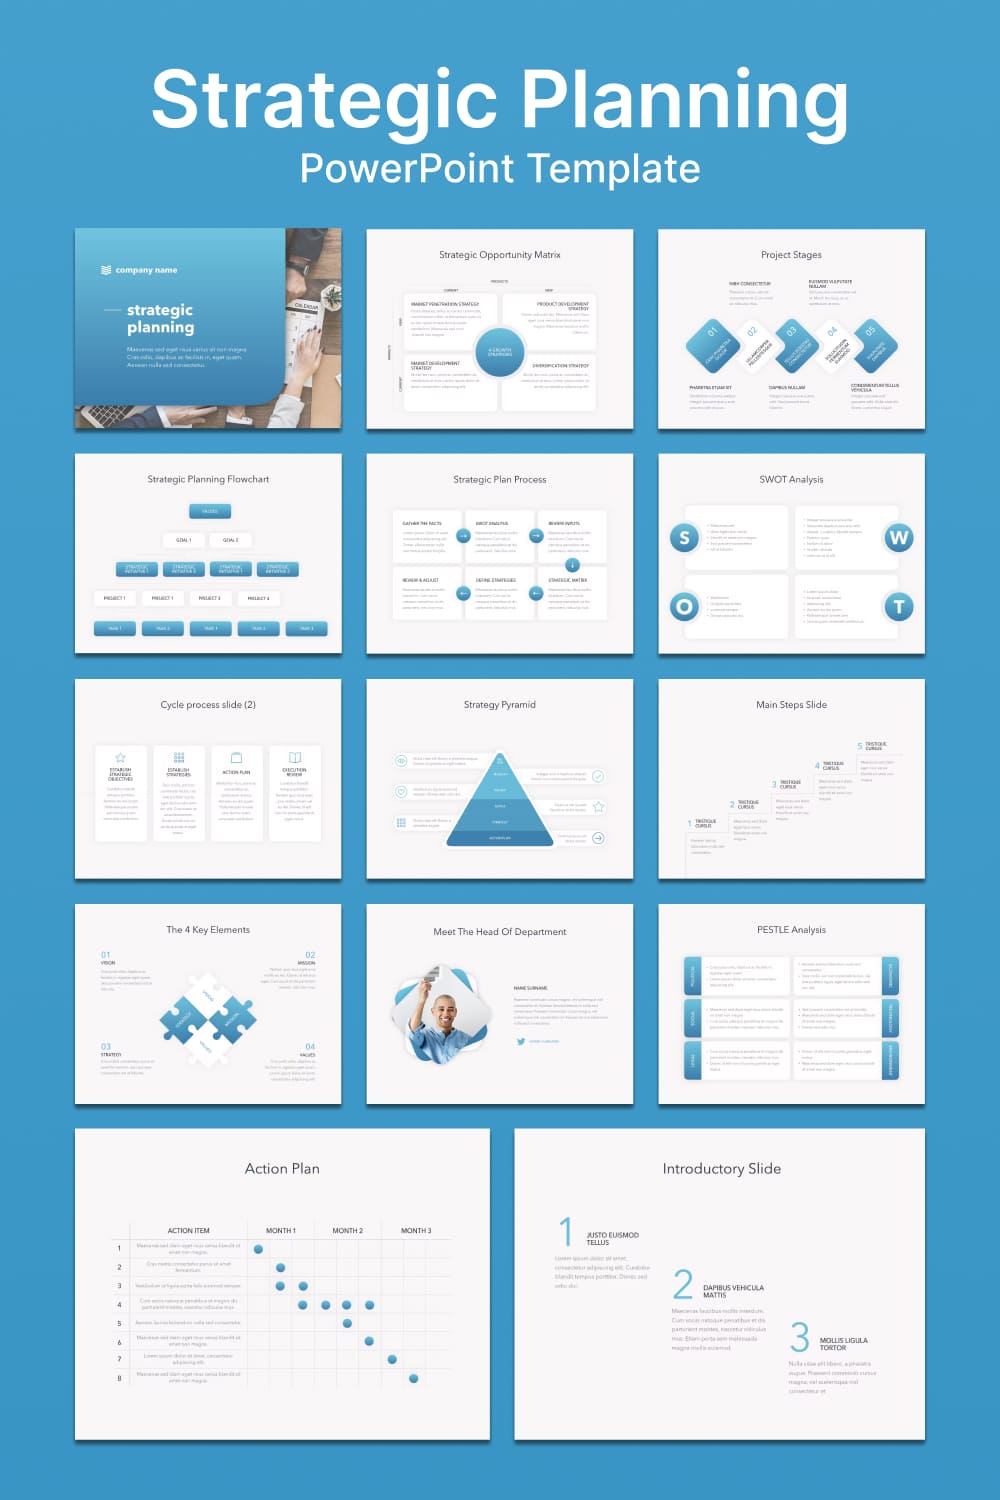 Strategic planning powerpoint template - pinterest image preview.